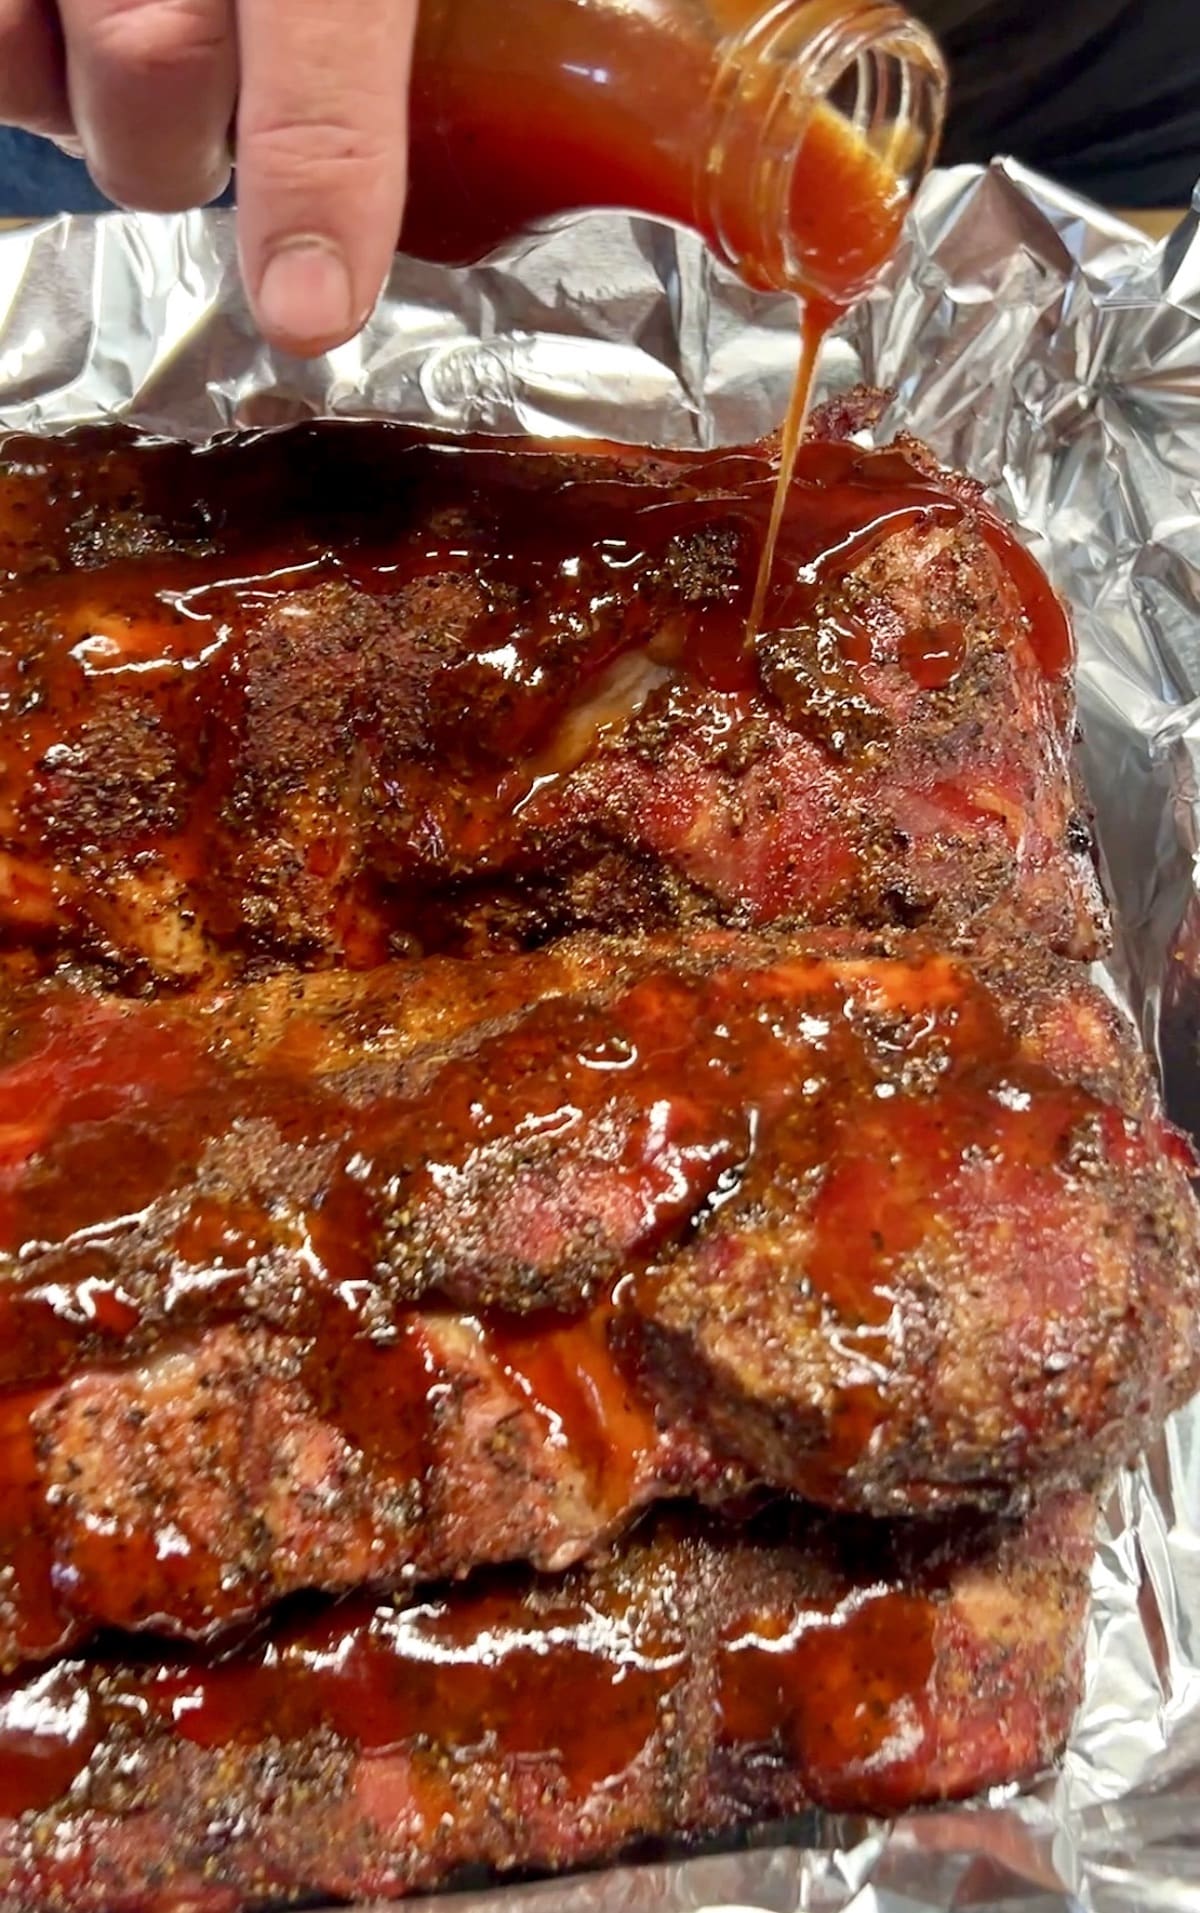 Pouring bbq sauce over Pork ribs.